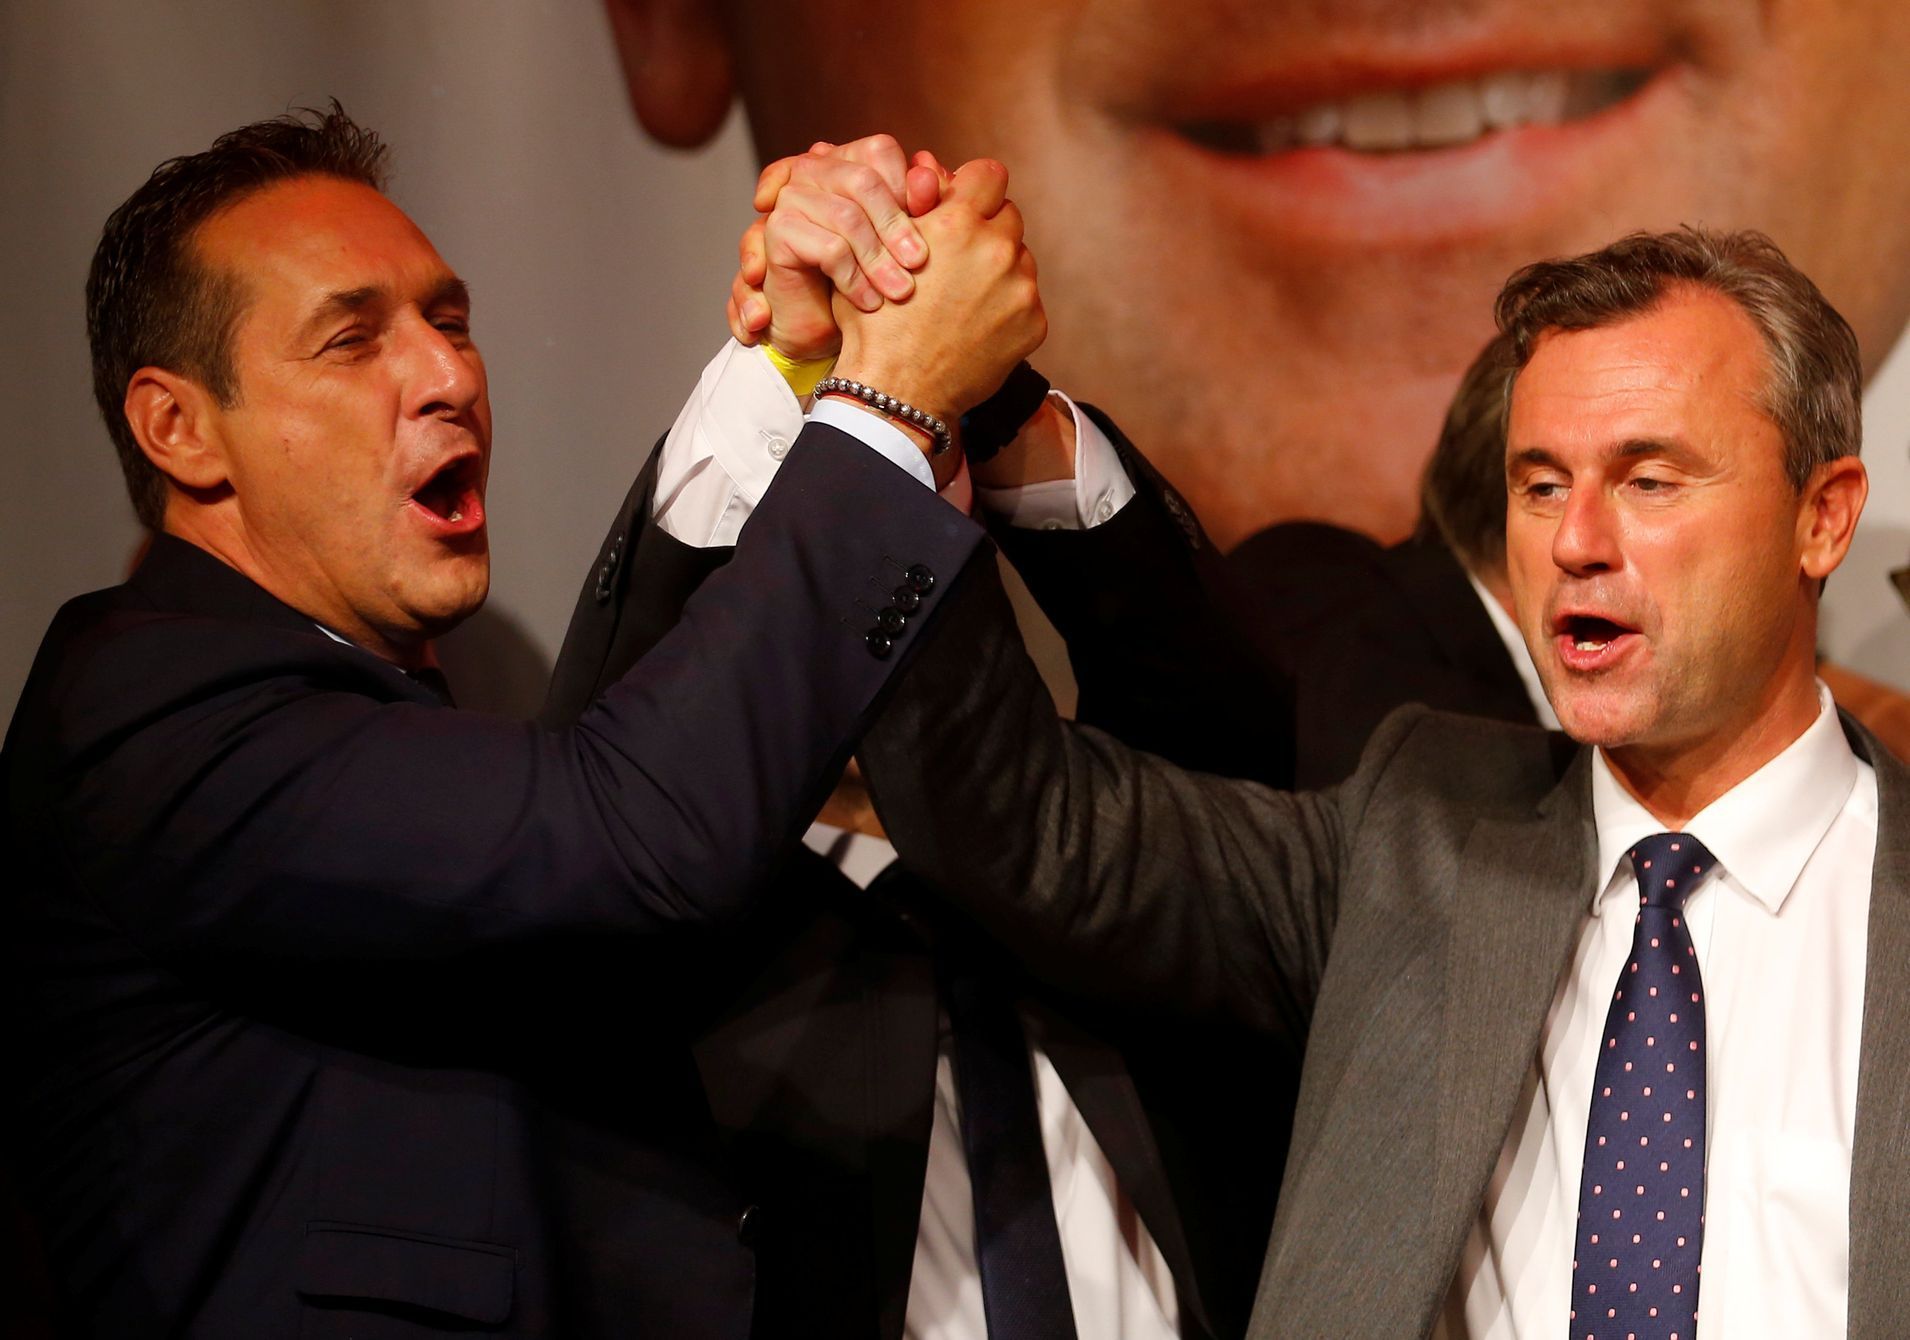 Presidential candidate Hofer of the Austrian Freedom Party (FPOe) and party head Strache sing a song during party celebrations after Austrian presidential election in Vienna